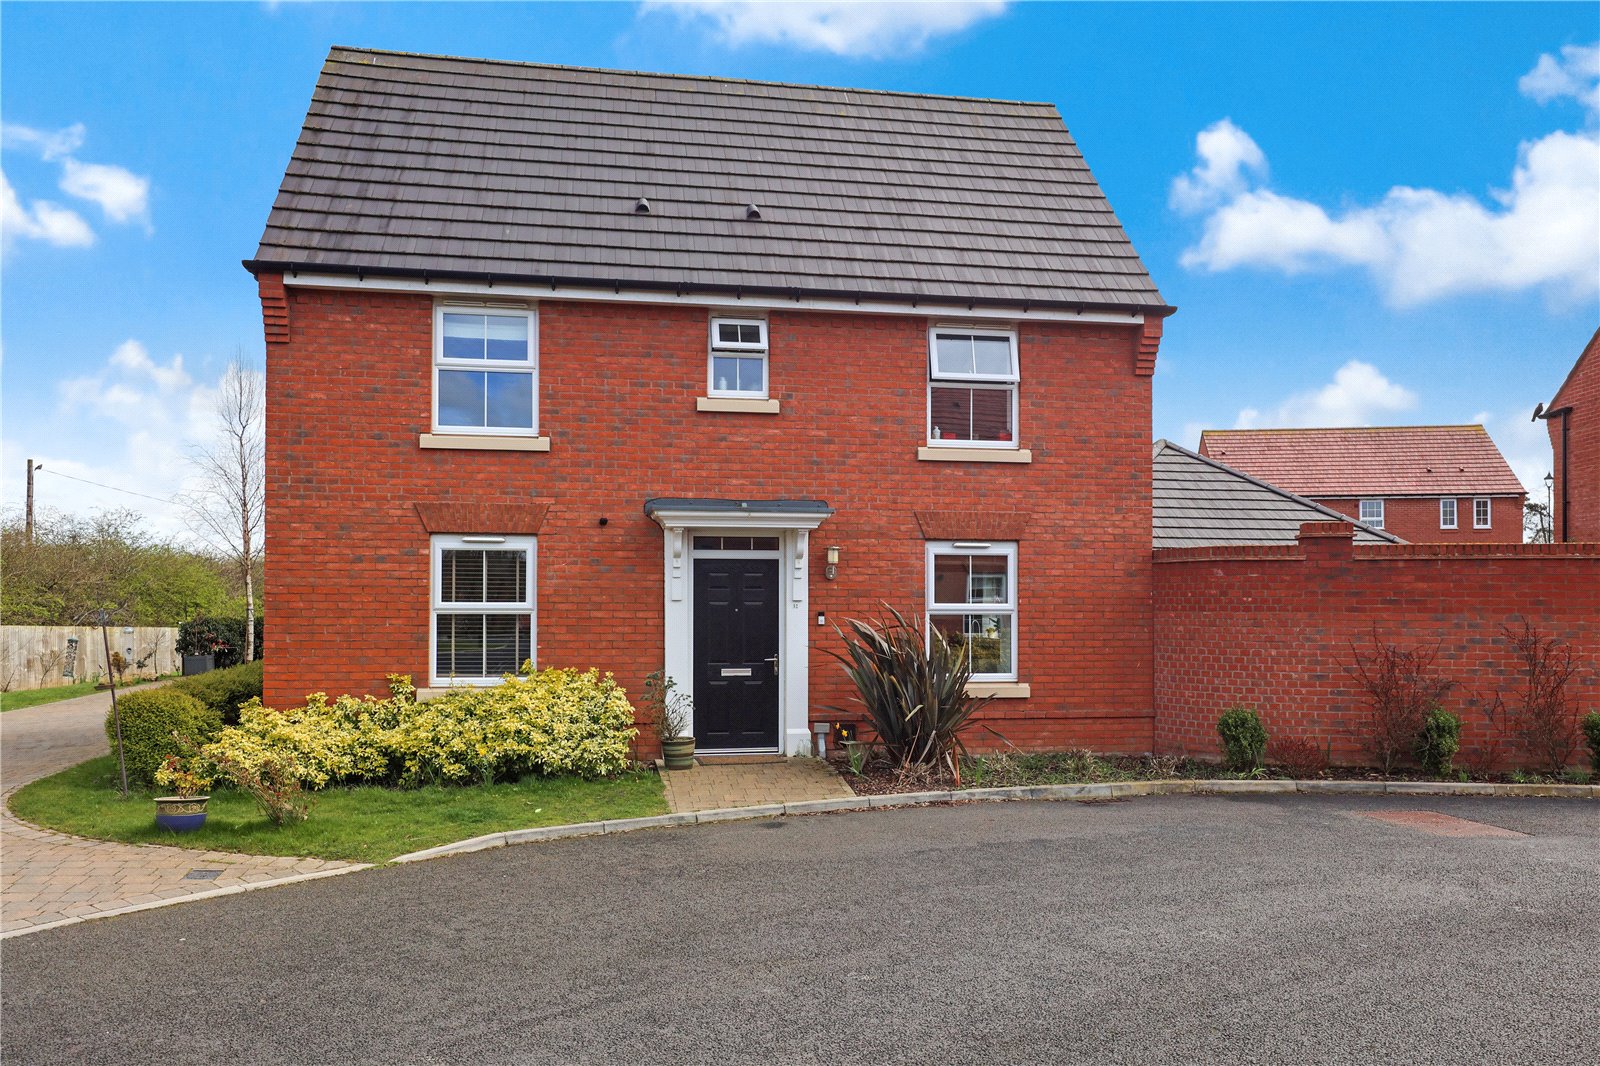 3 bed house for sale in Ayton Meadows, Nunthorpe 1